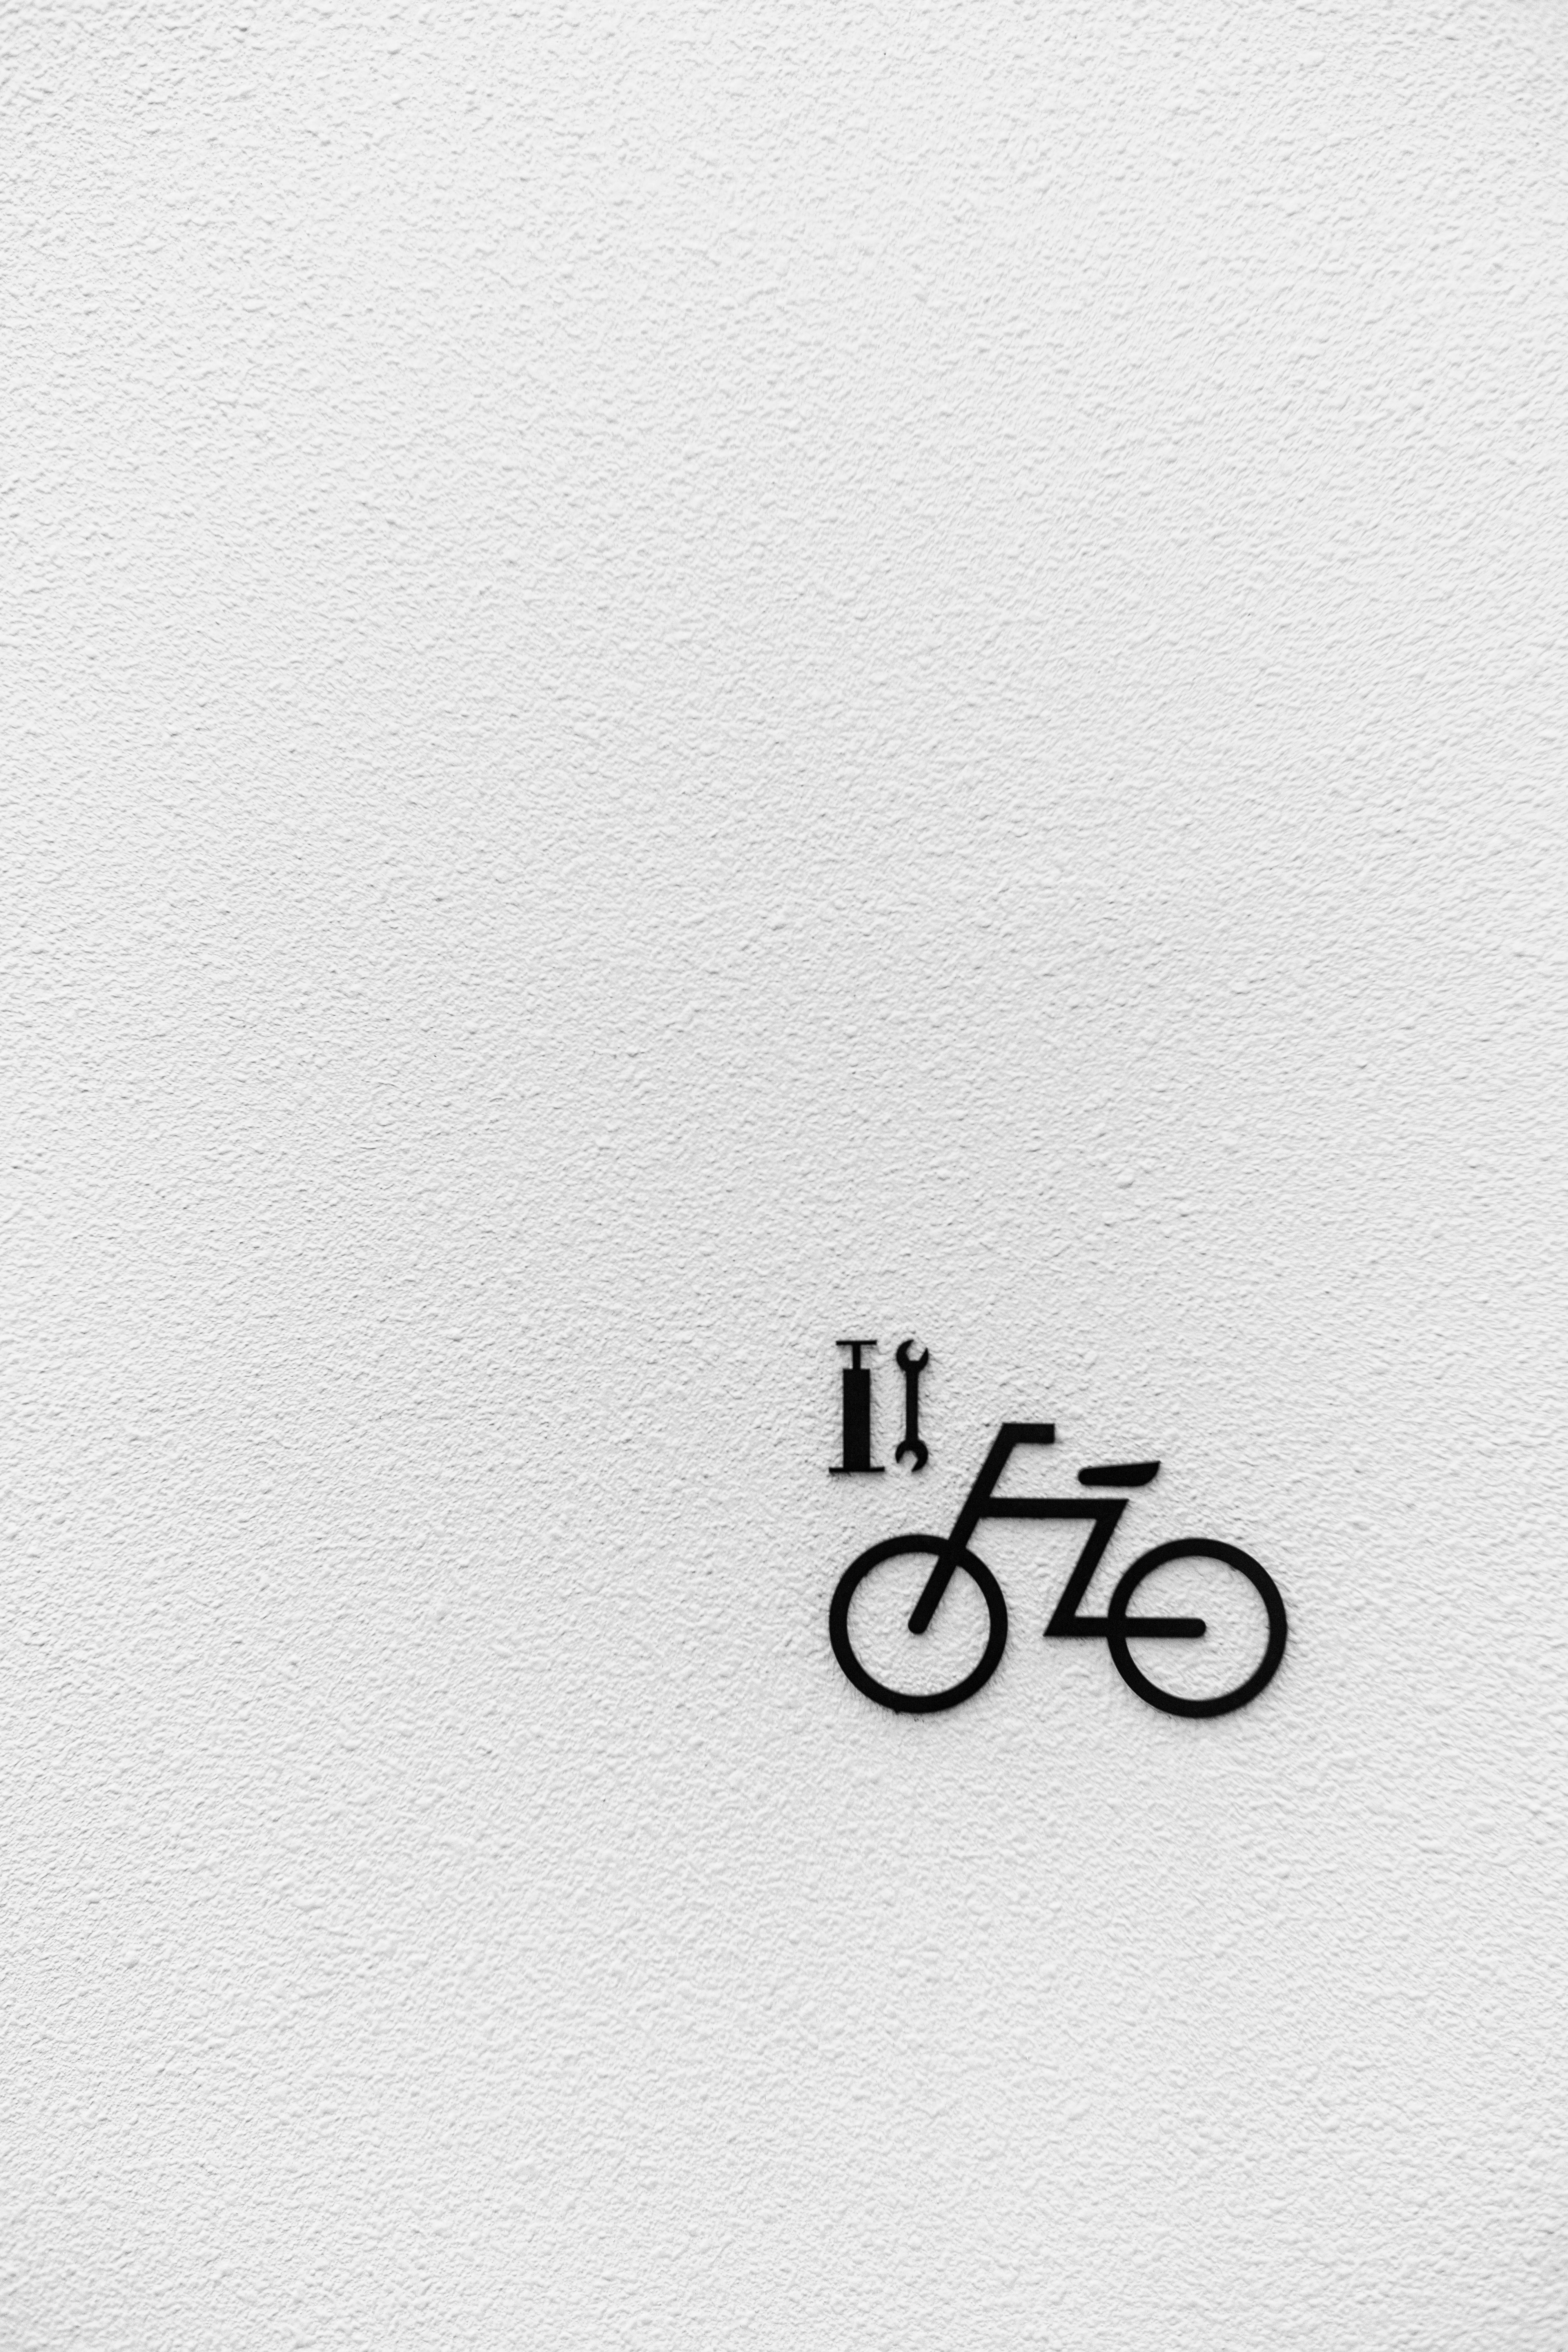 Free HD bicycle, textures, texture, wall